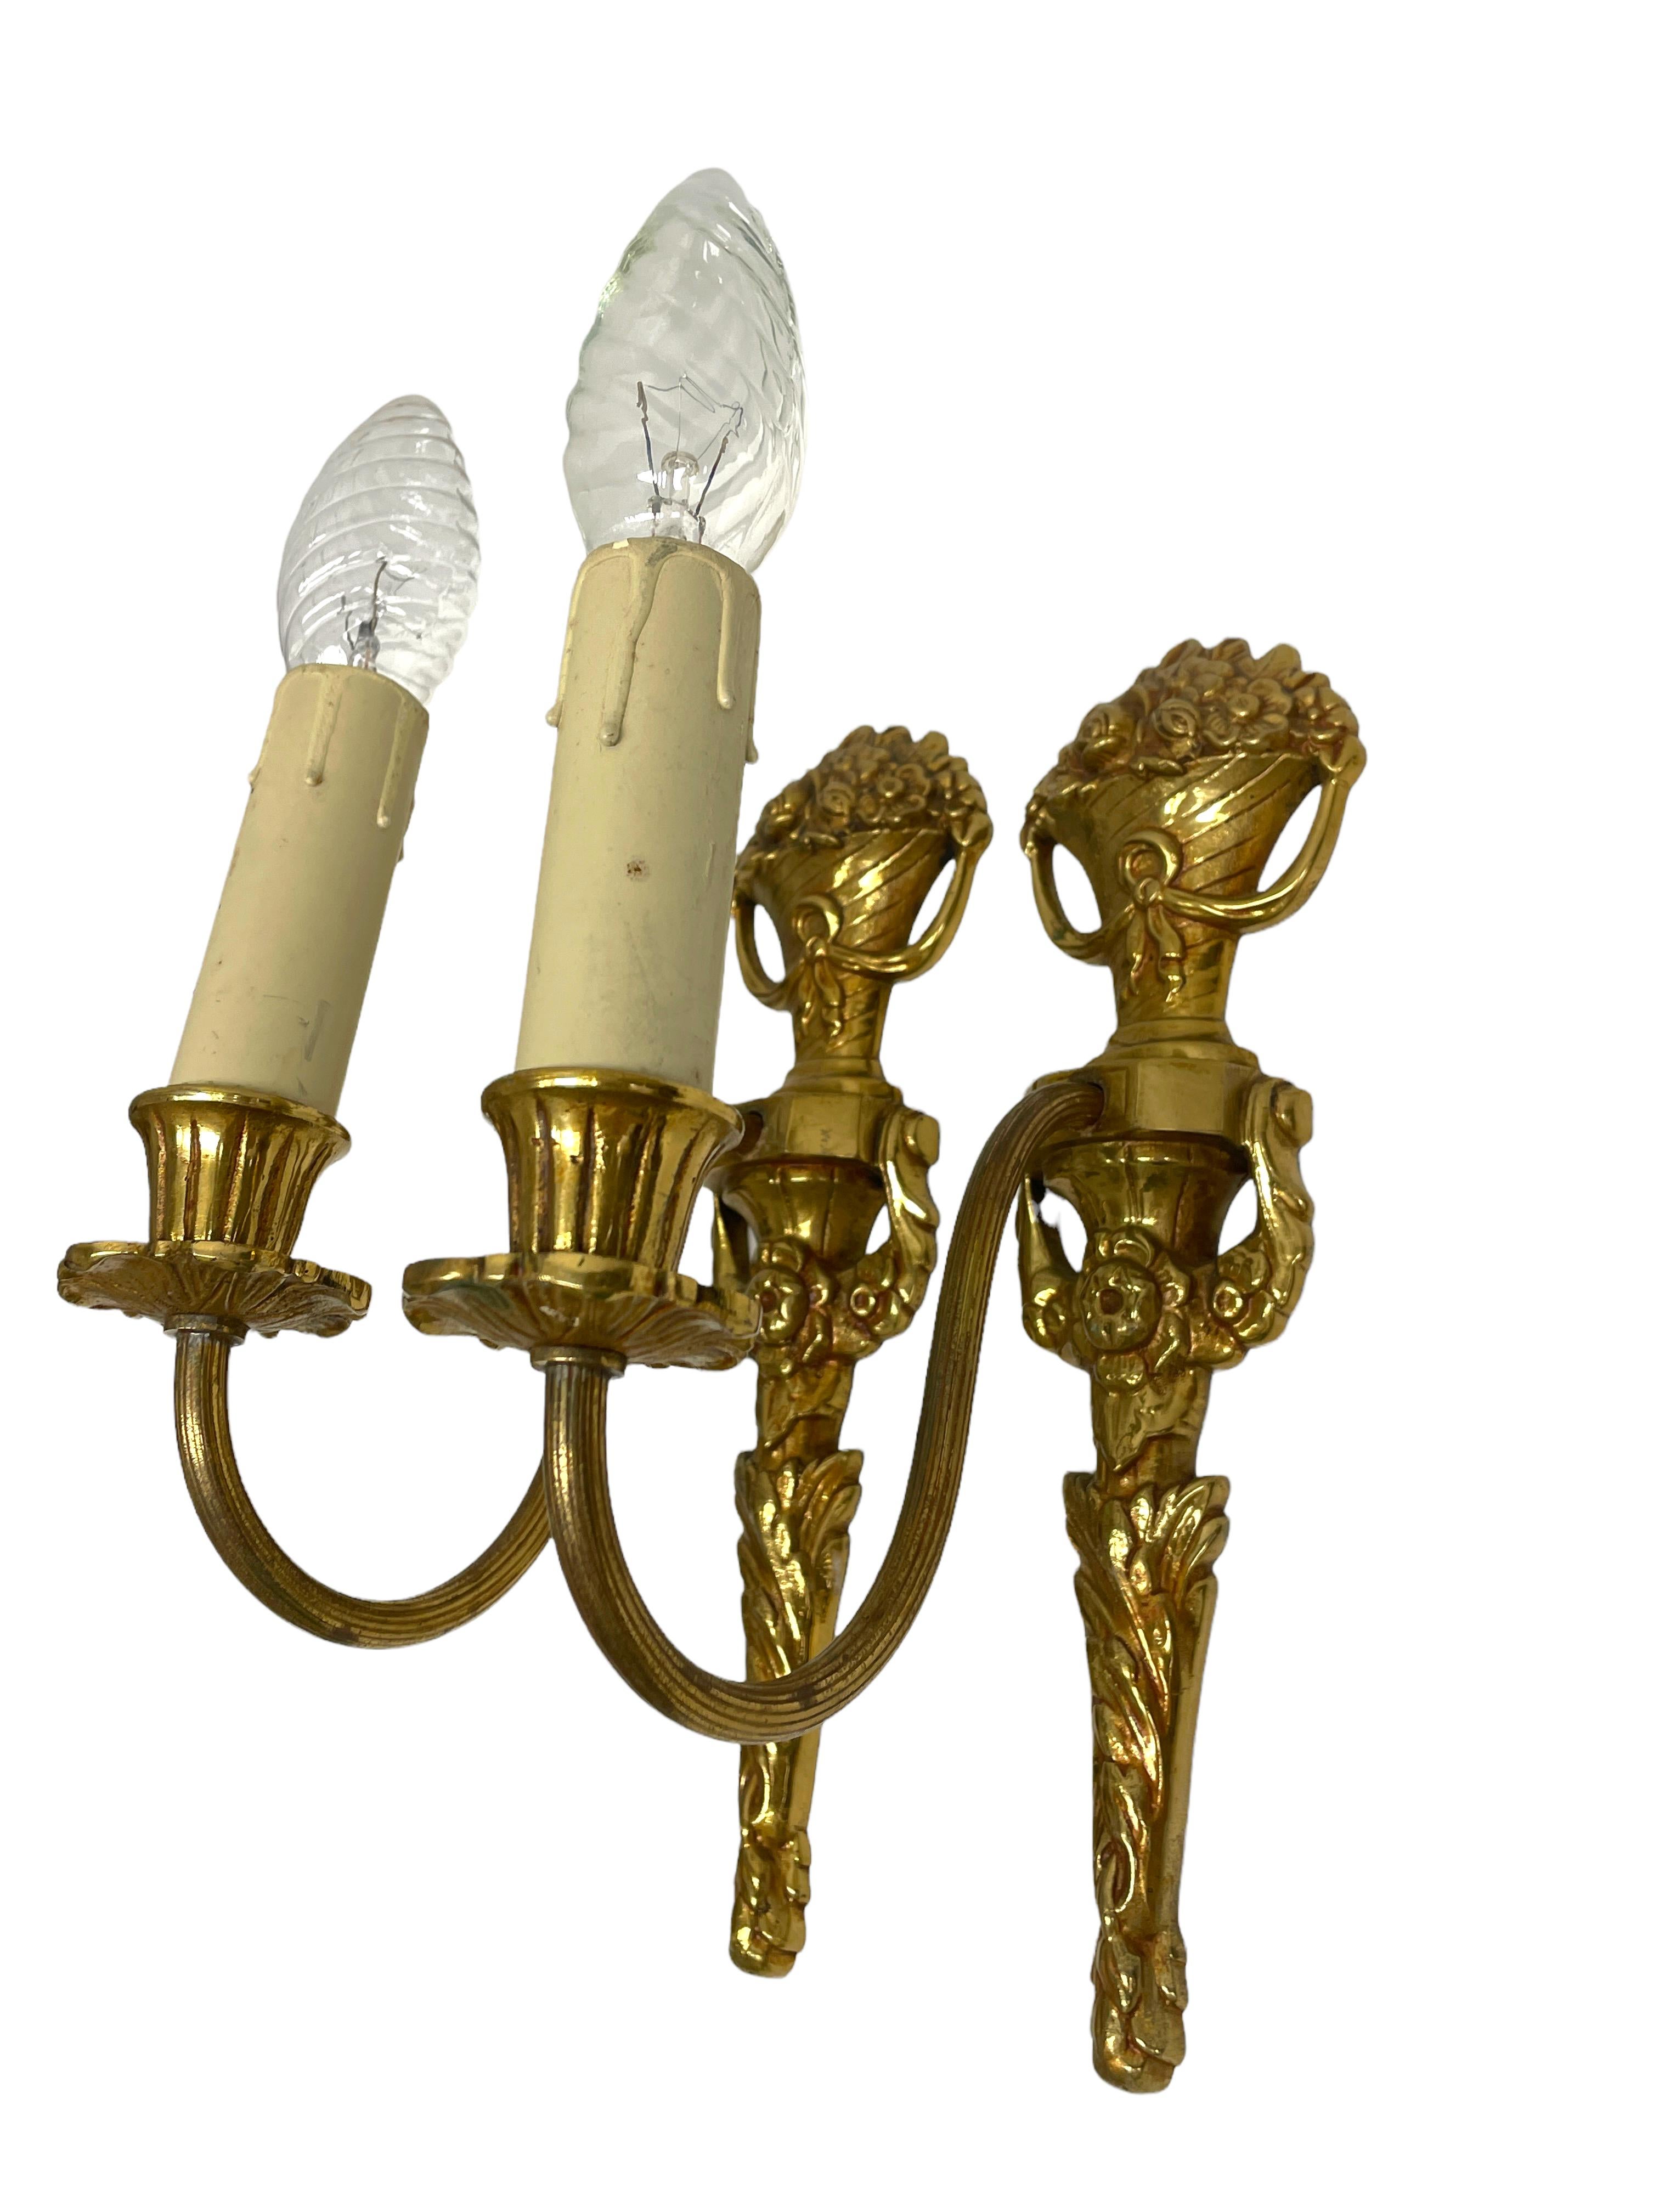 Mid-20th Century Pair of Empire Wall Sconces in Bronze with Flower Basket Motif, Sweden, 1950s For Sale